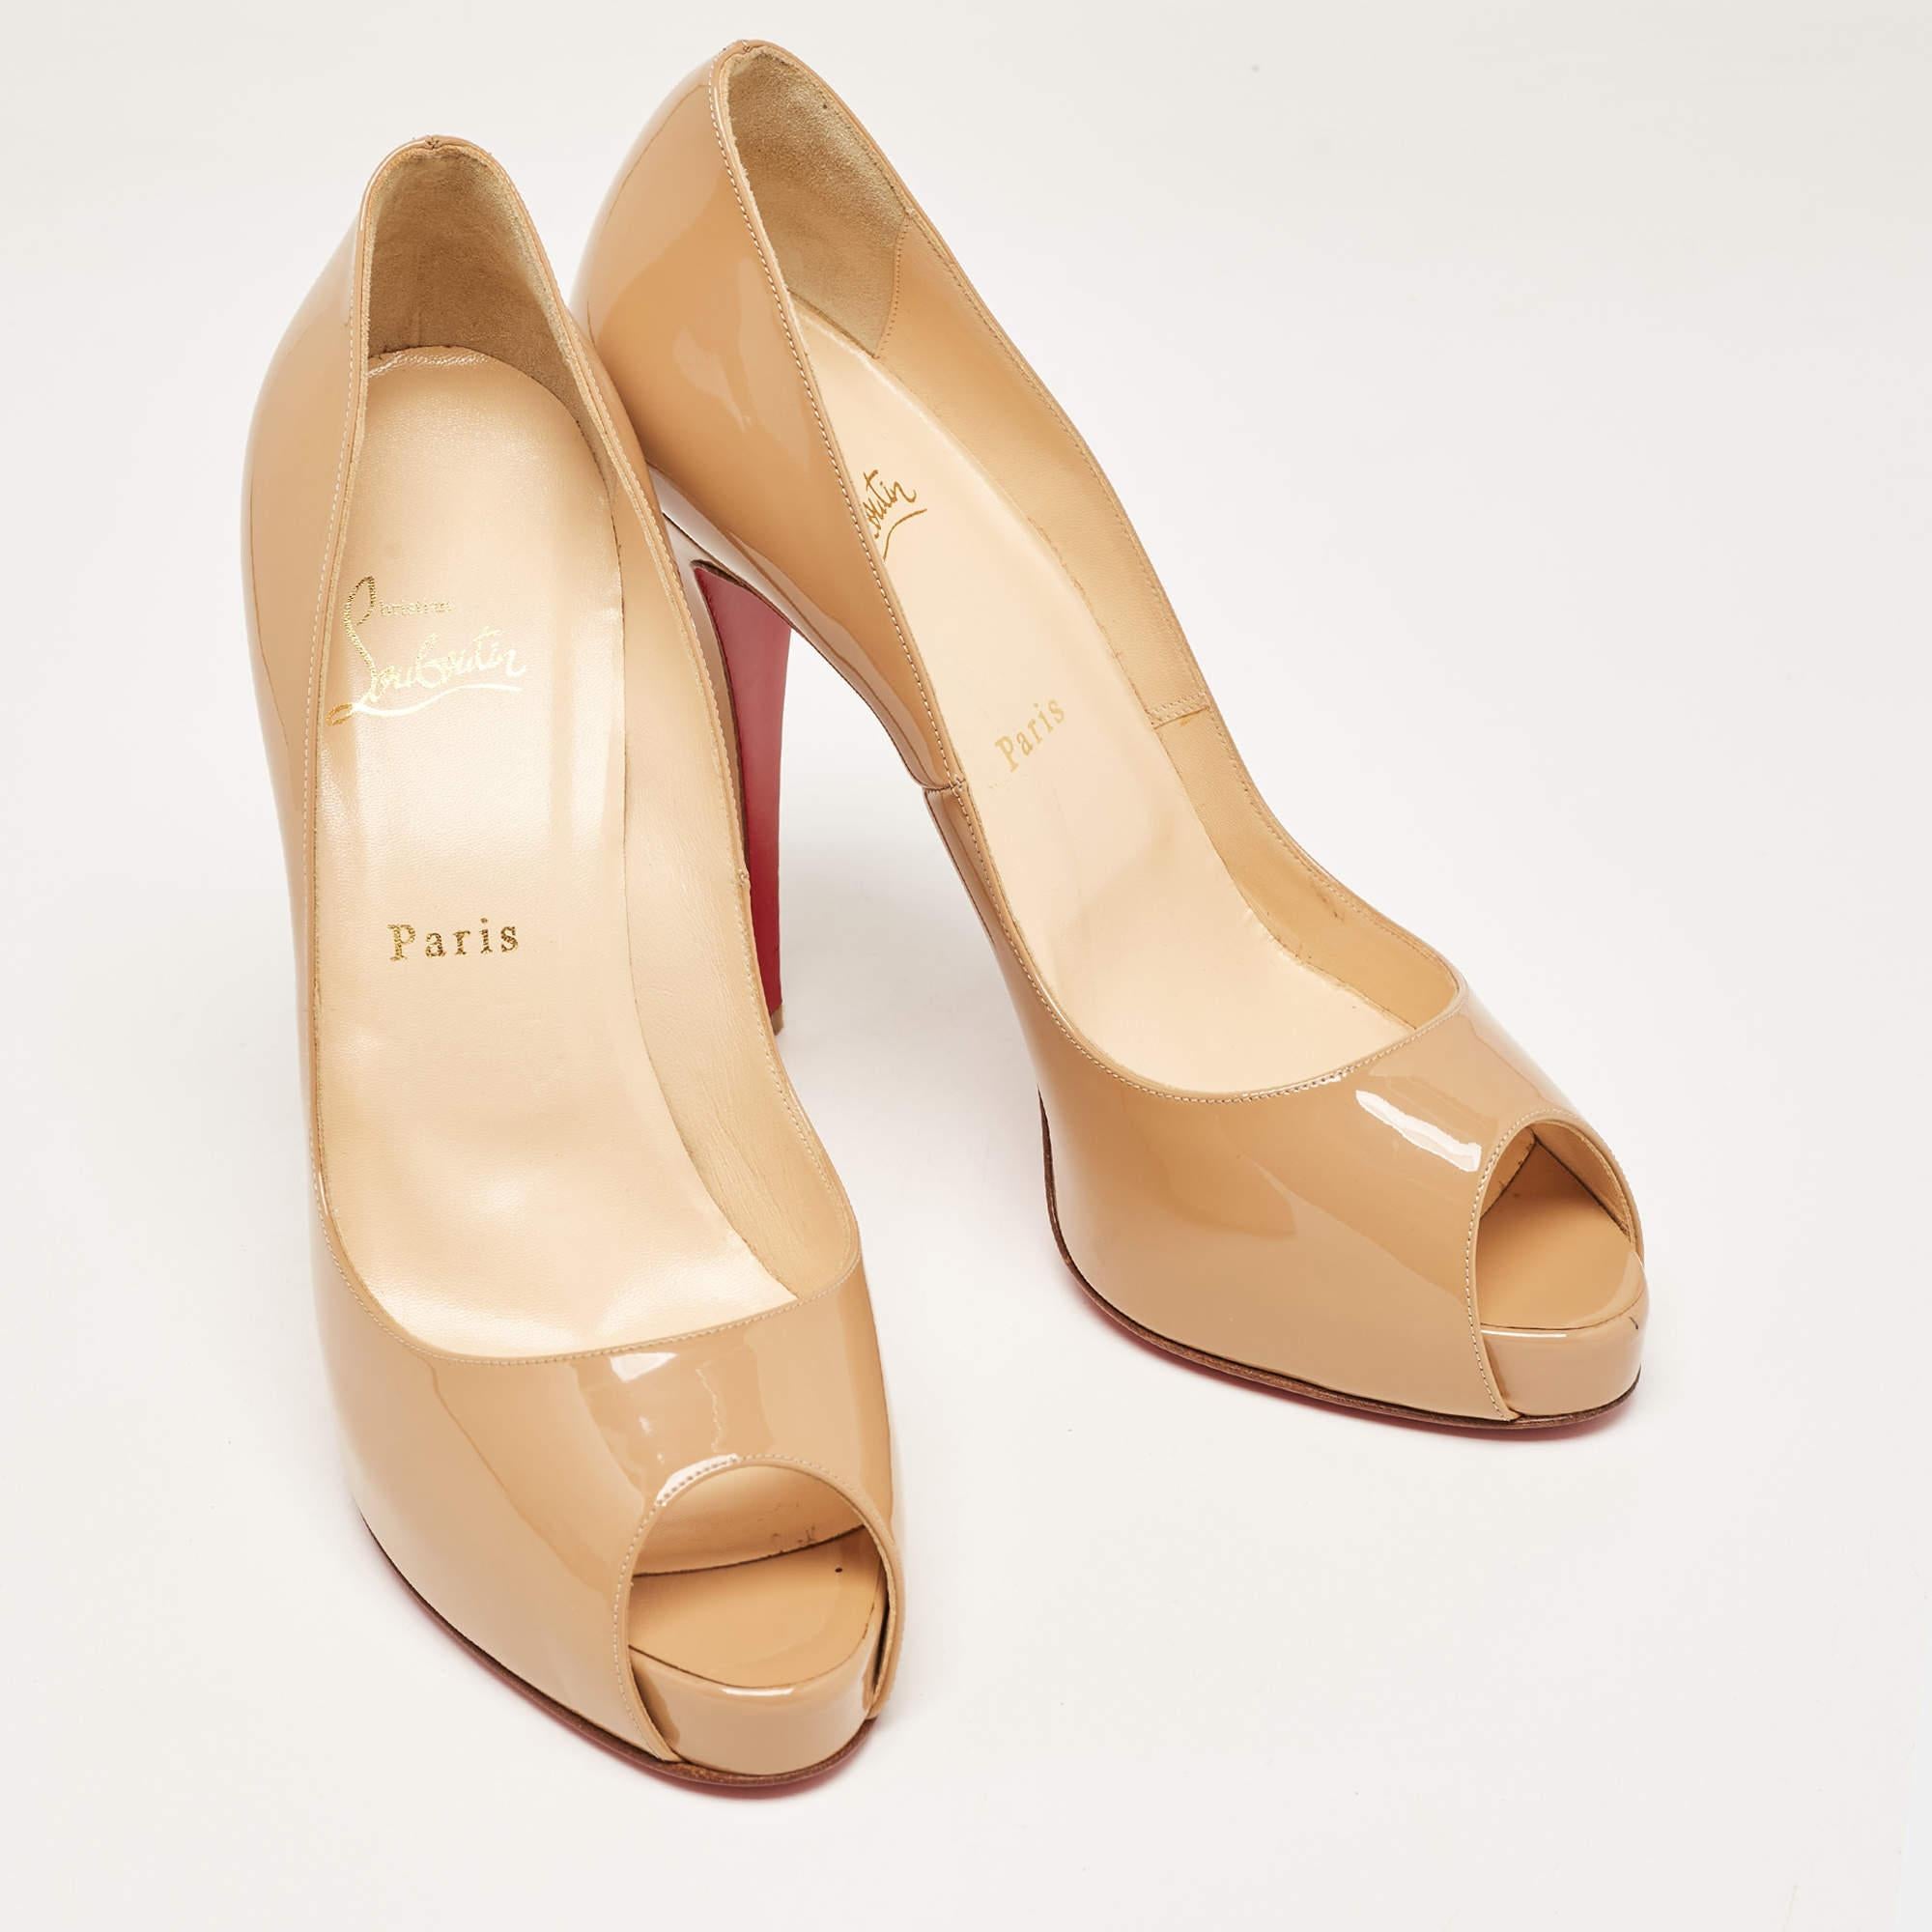 Christian Louboutin Beige Patent Leather Very Prive Pumps Size 41 For Sale 2